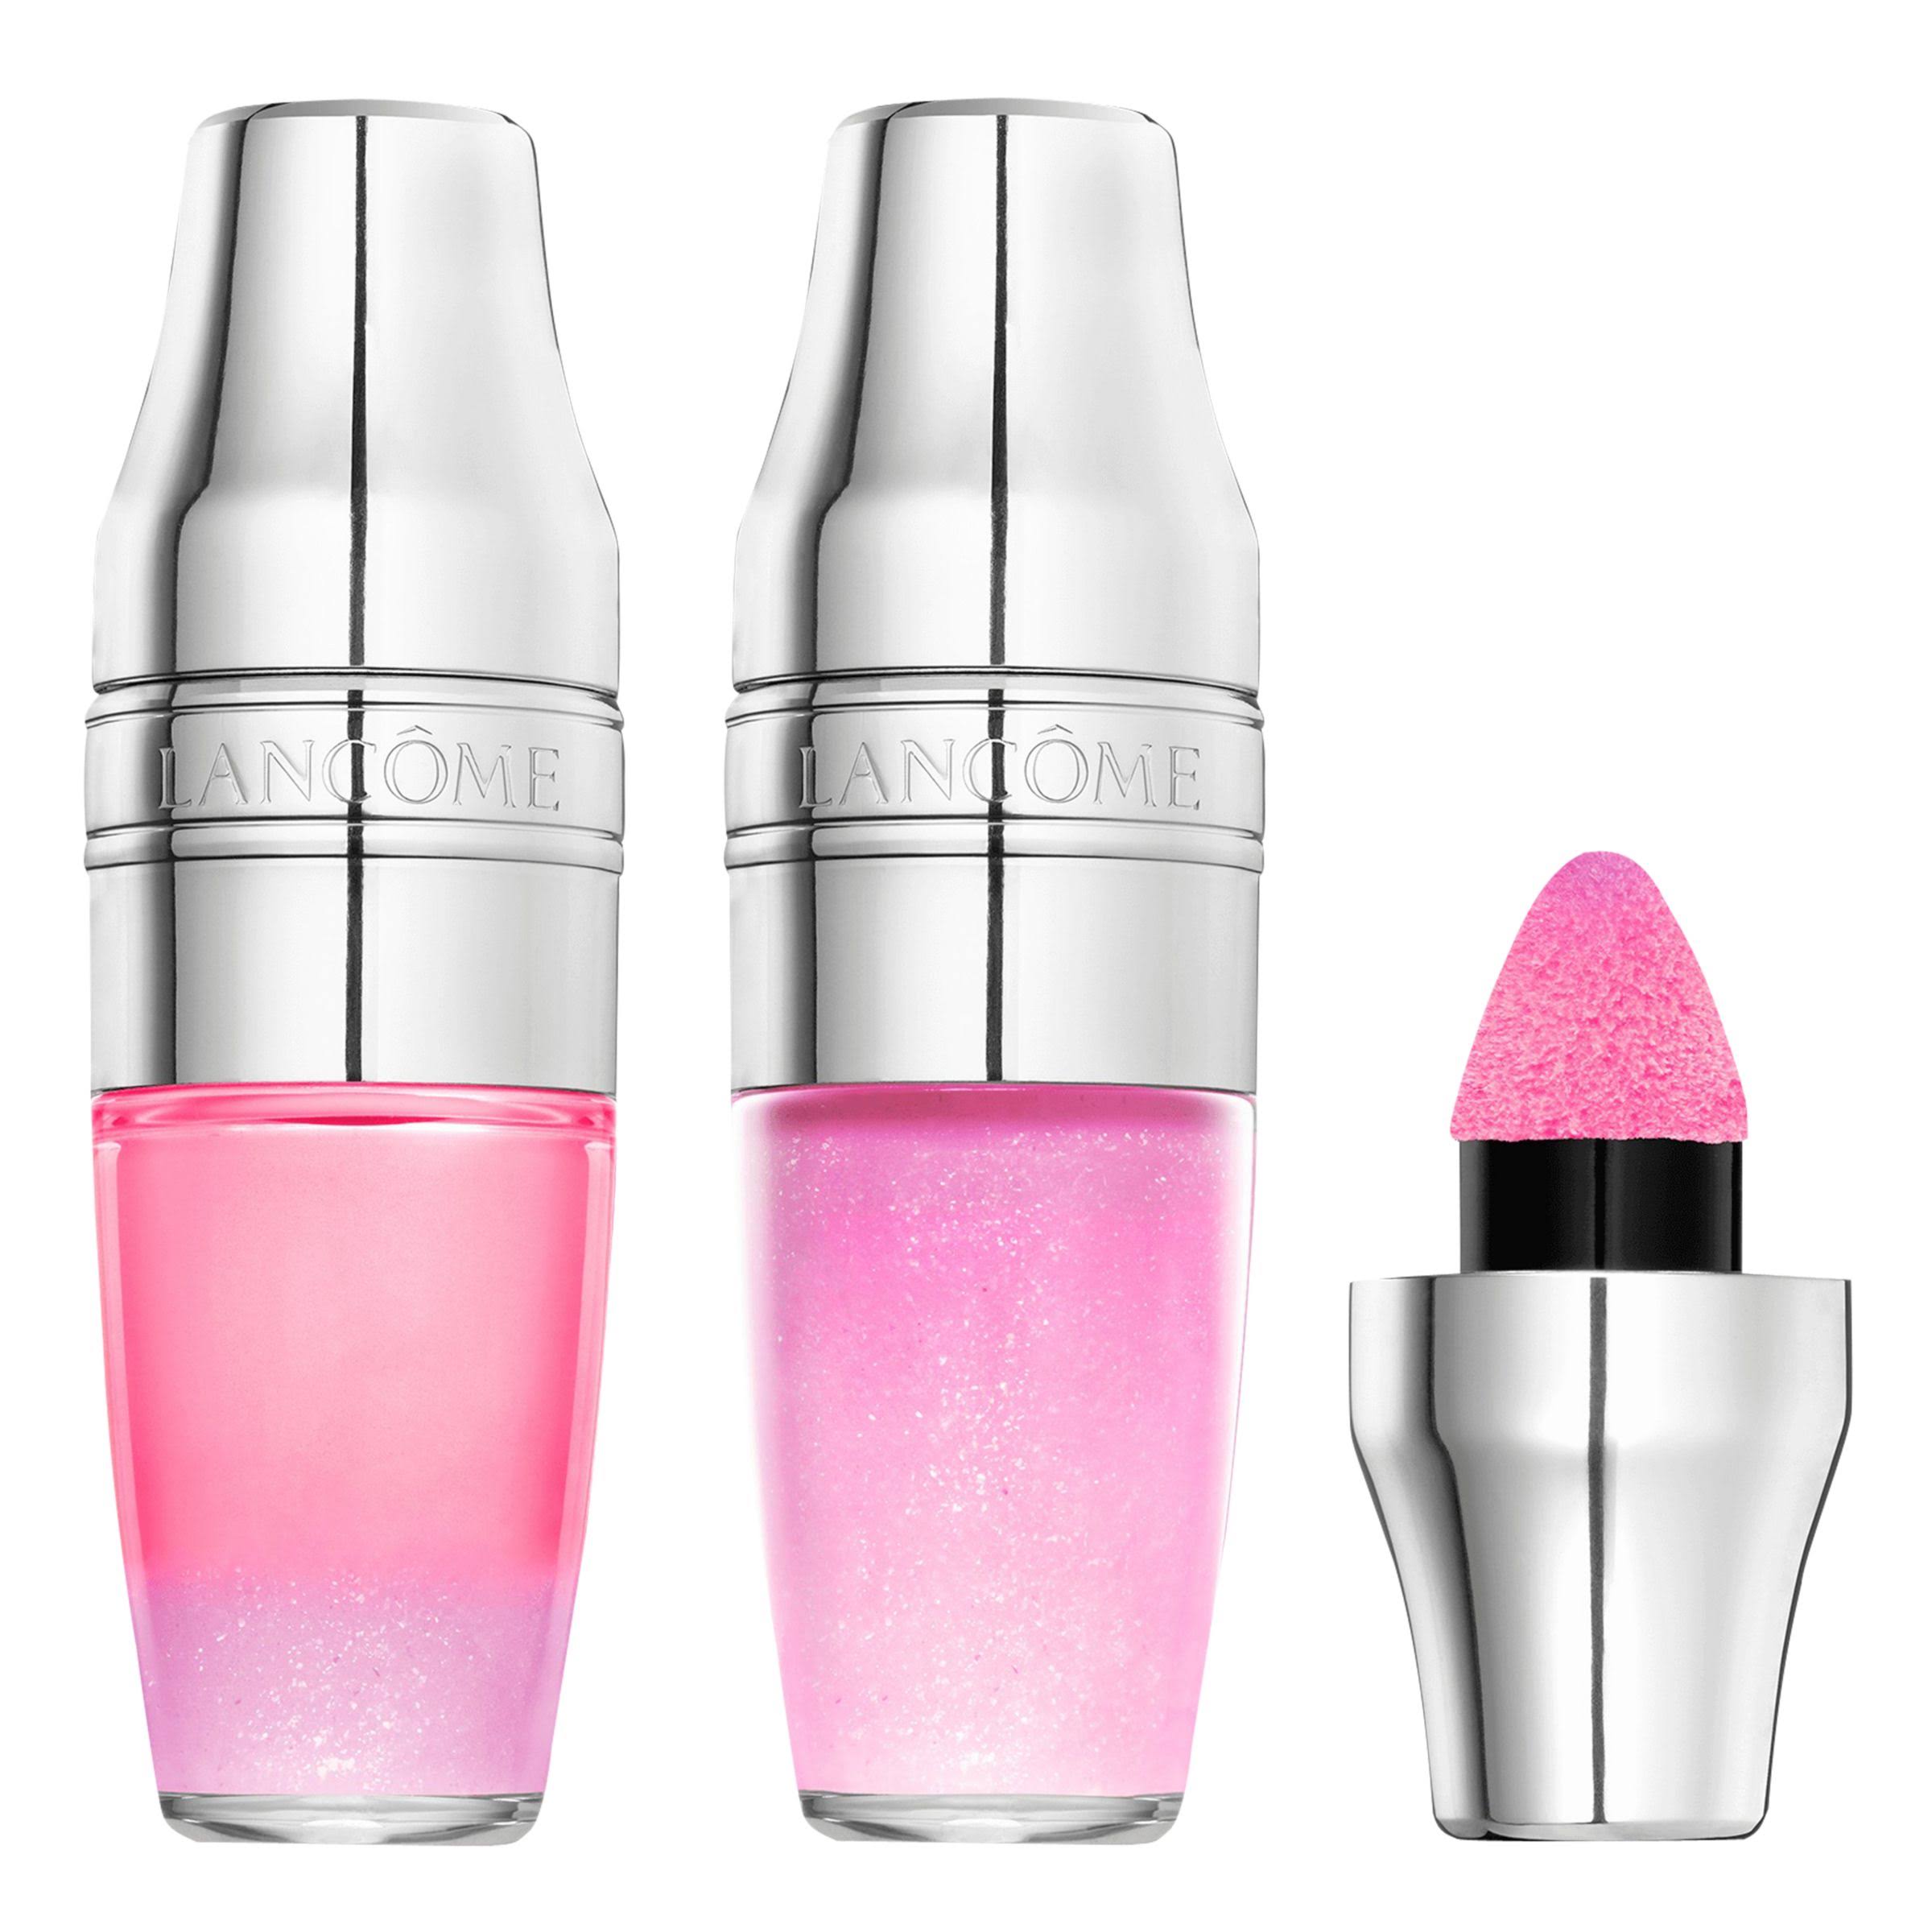 Lancome Juicy Shaker - 303 Cocoon Candy